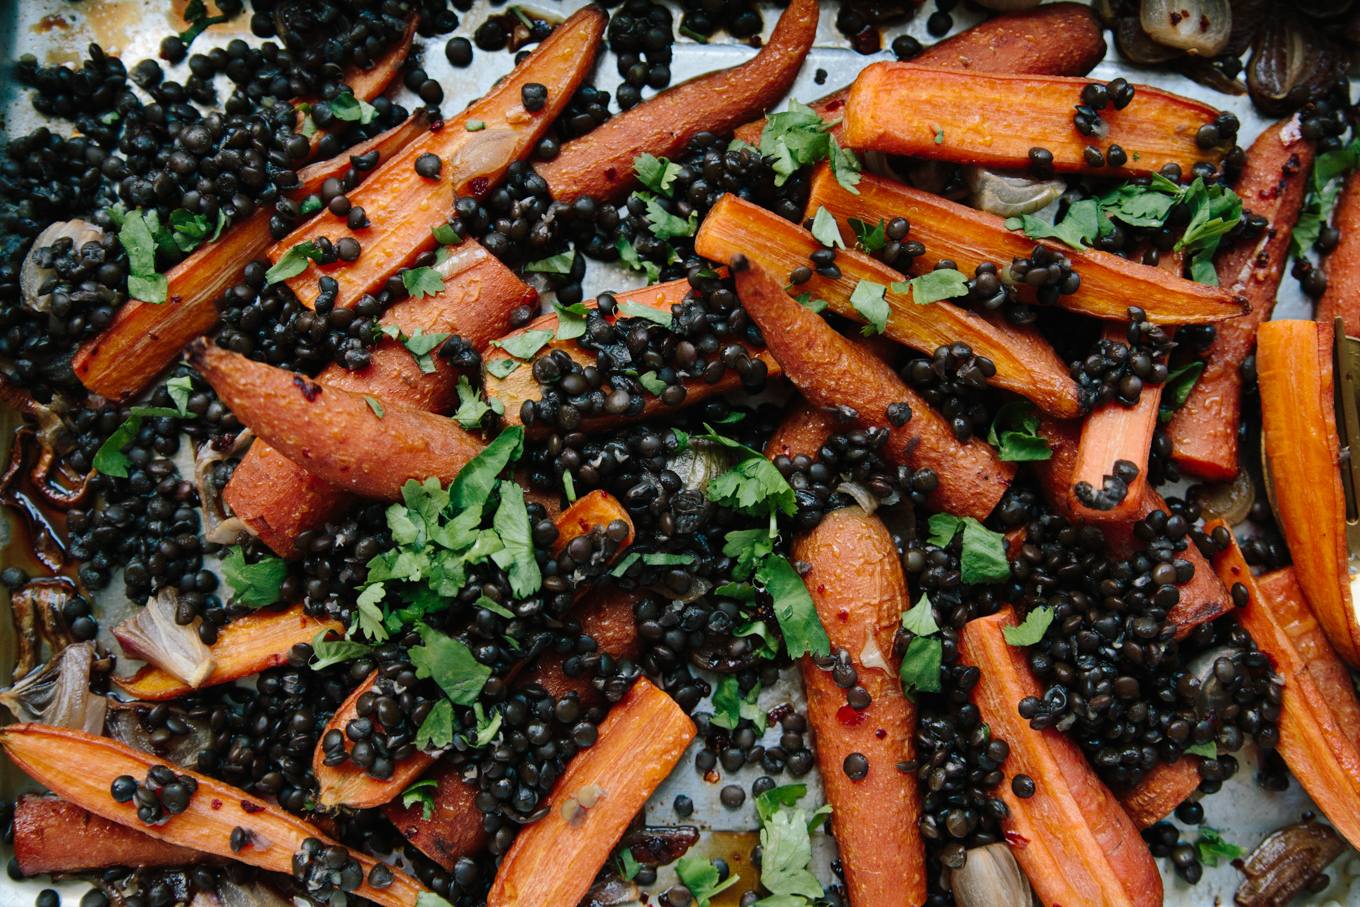 Recipe: Sweet & Spicy Carrot Lentil Salad